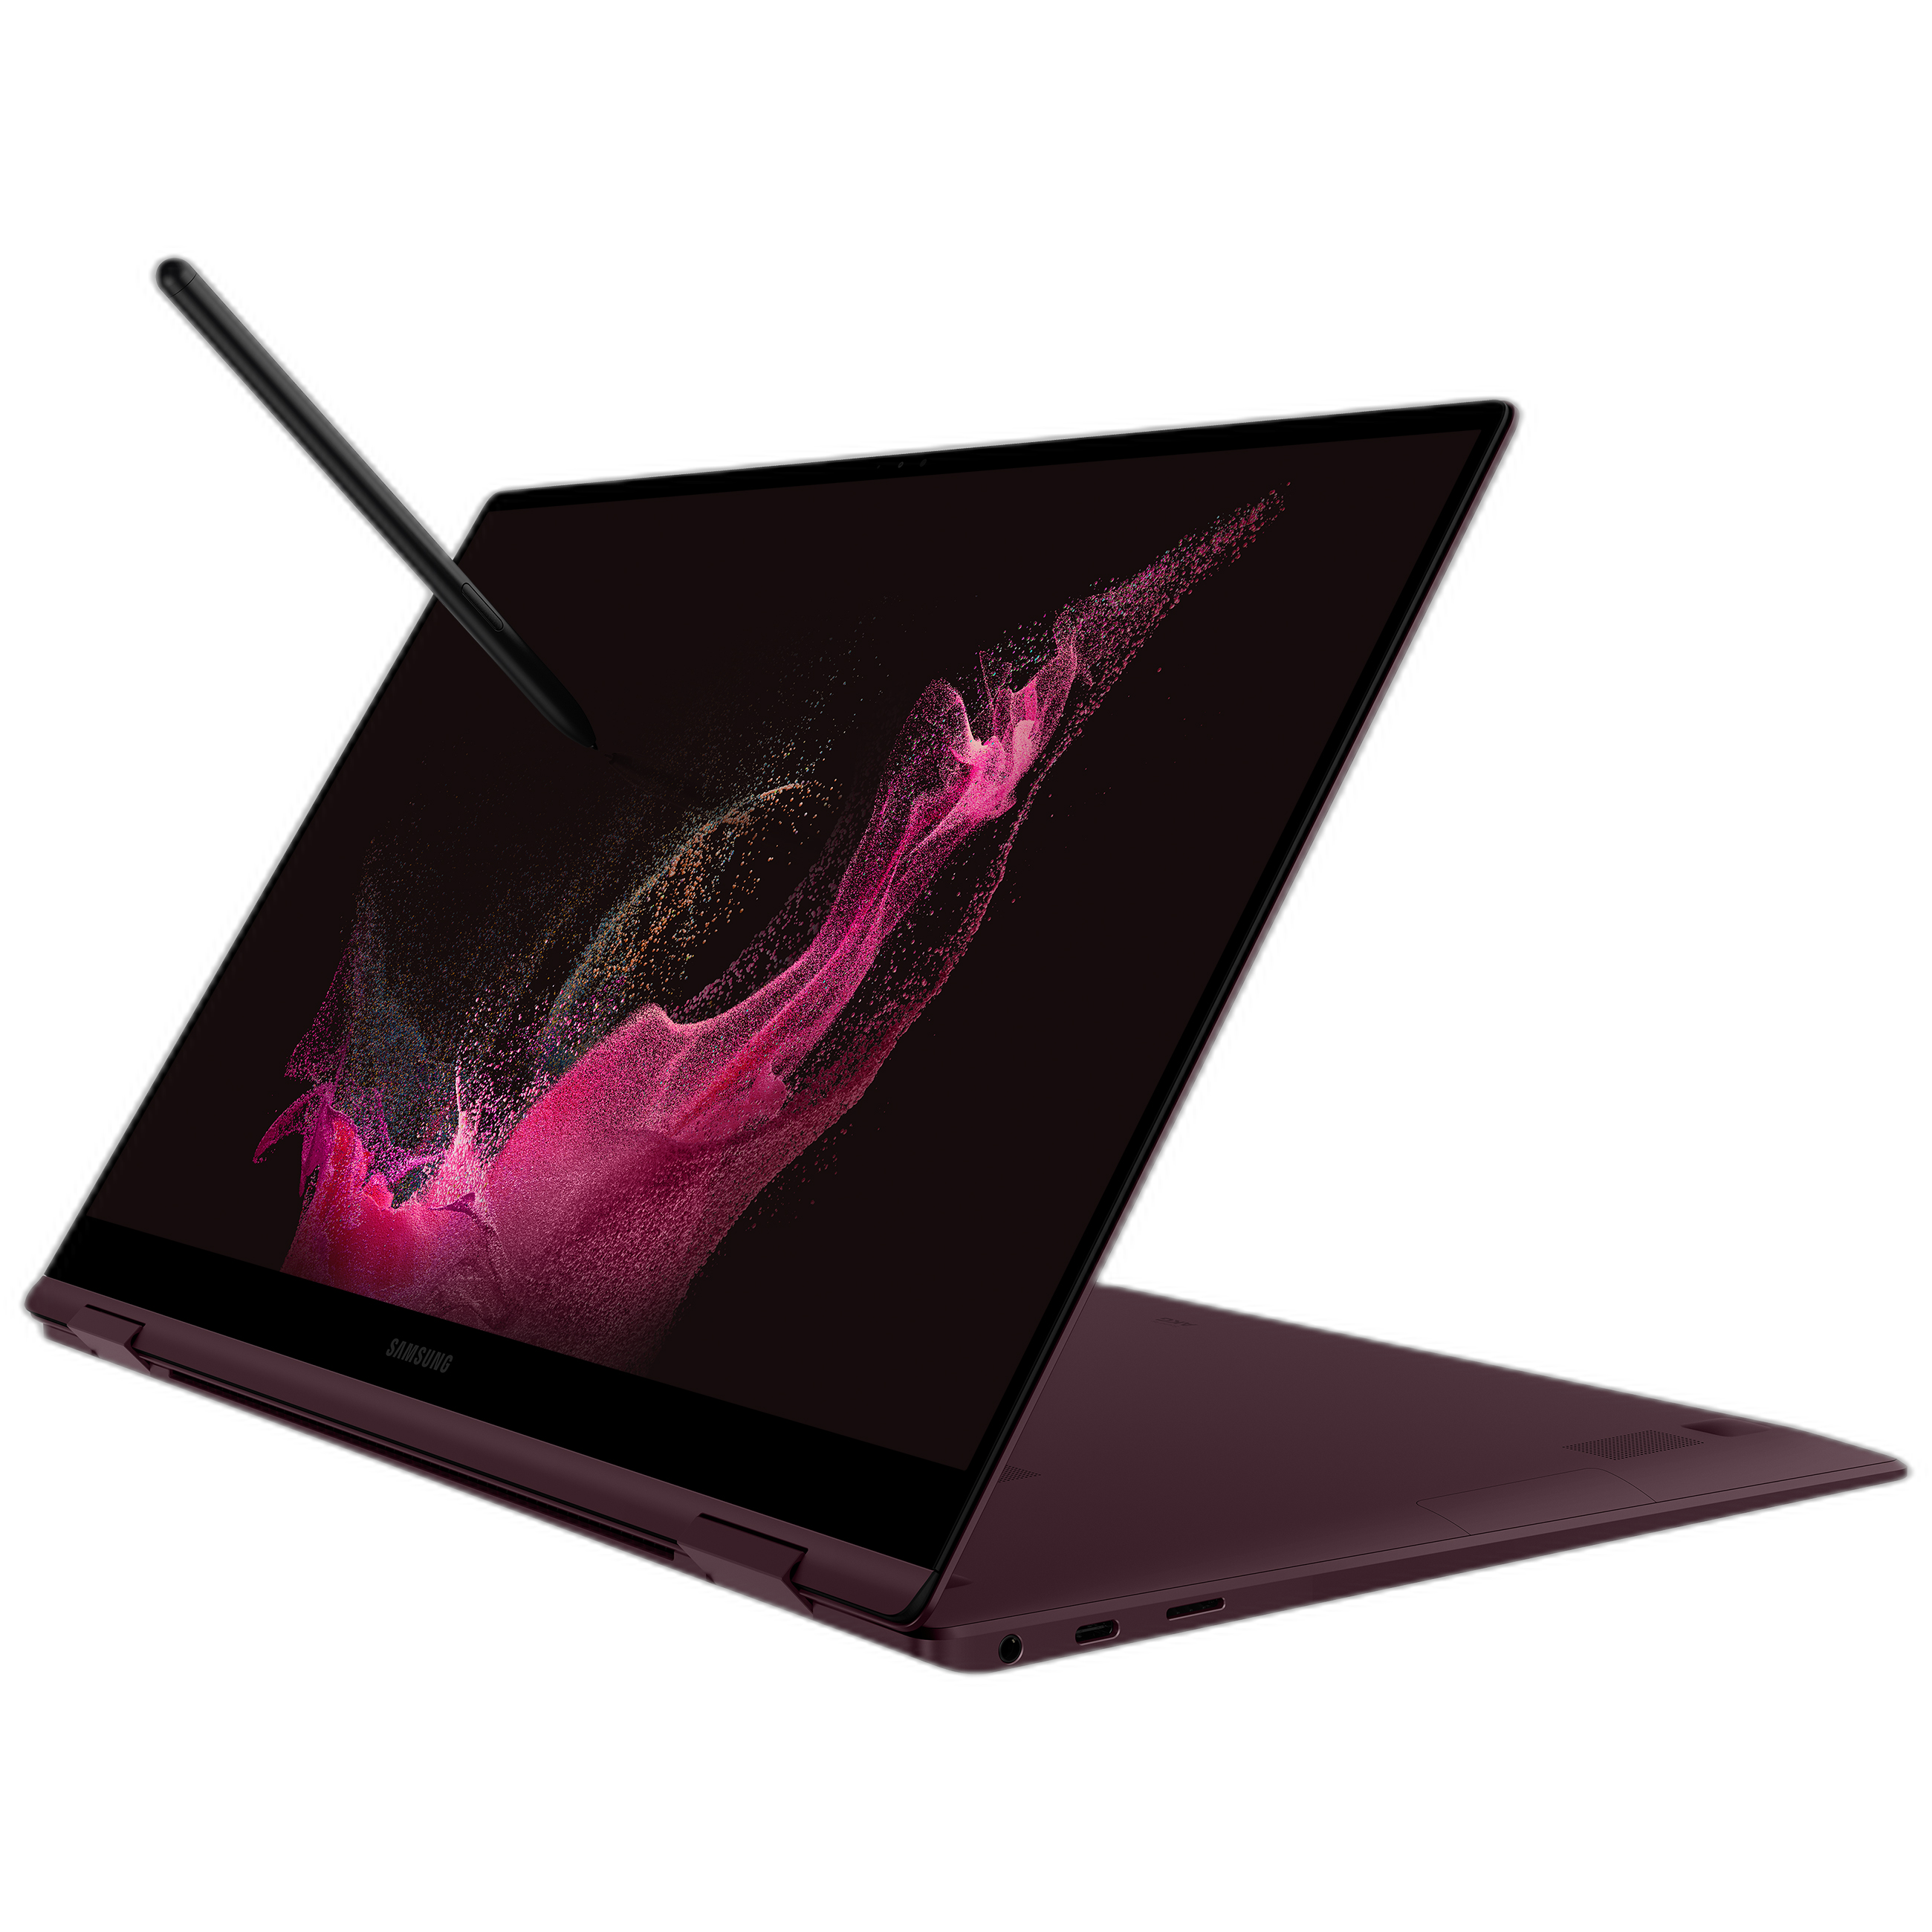 Samsung Galaxy Book 2 Pro 360 laptop in stand mode with S Pen on screen